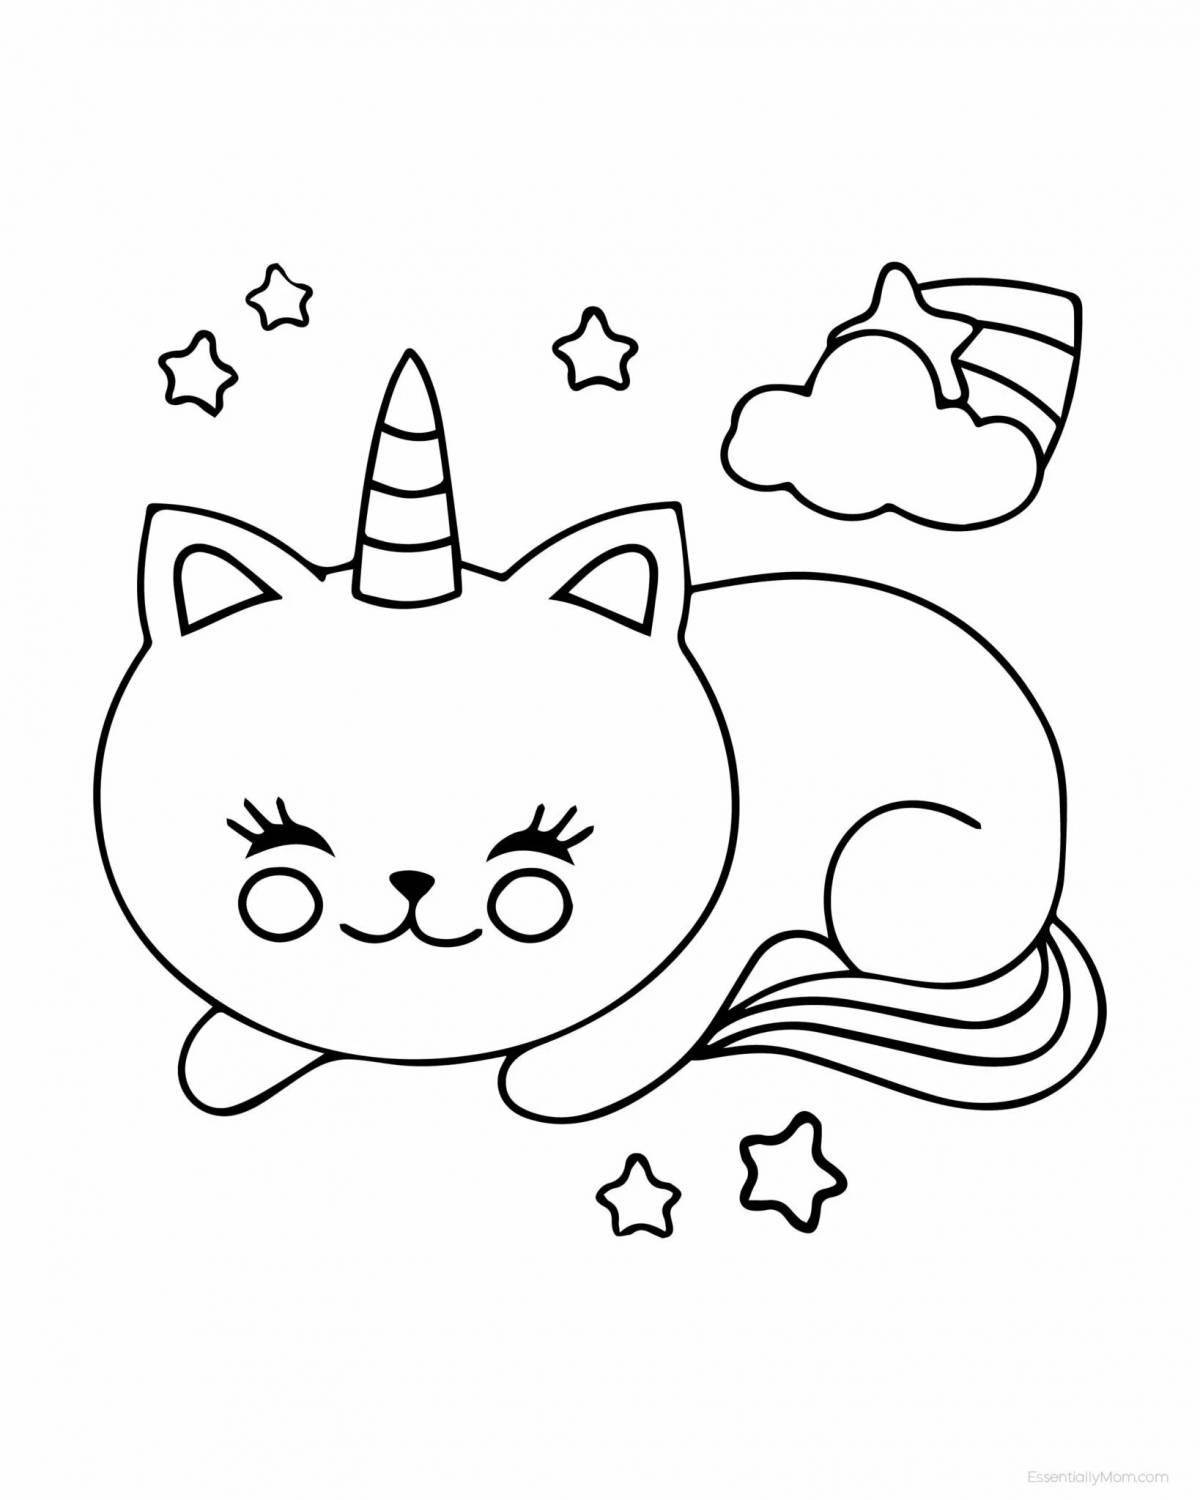 Incredible unicorn cat coloring book for kids